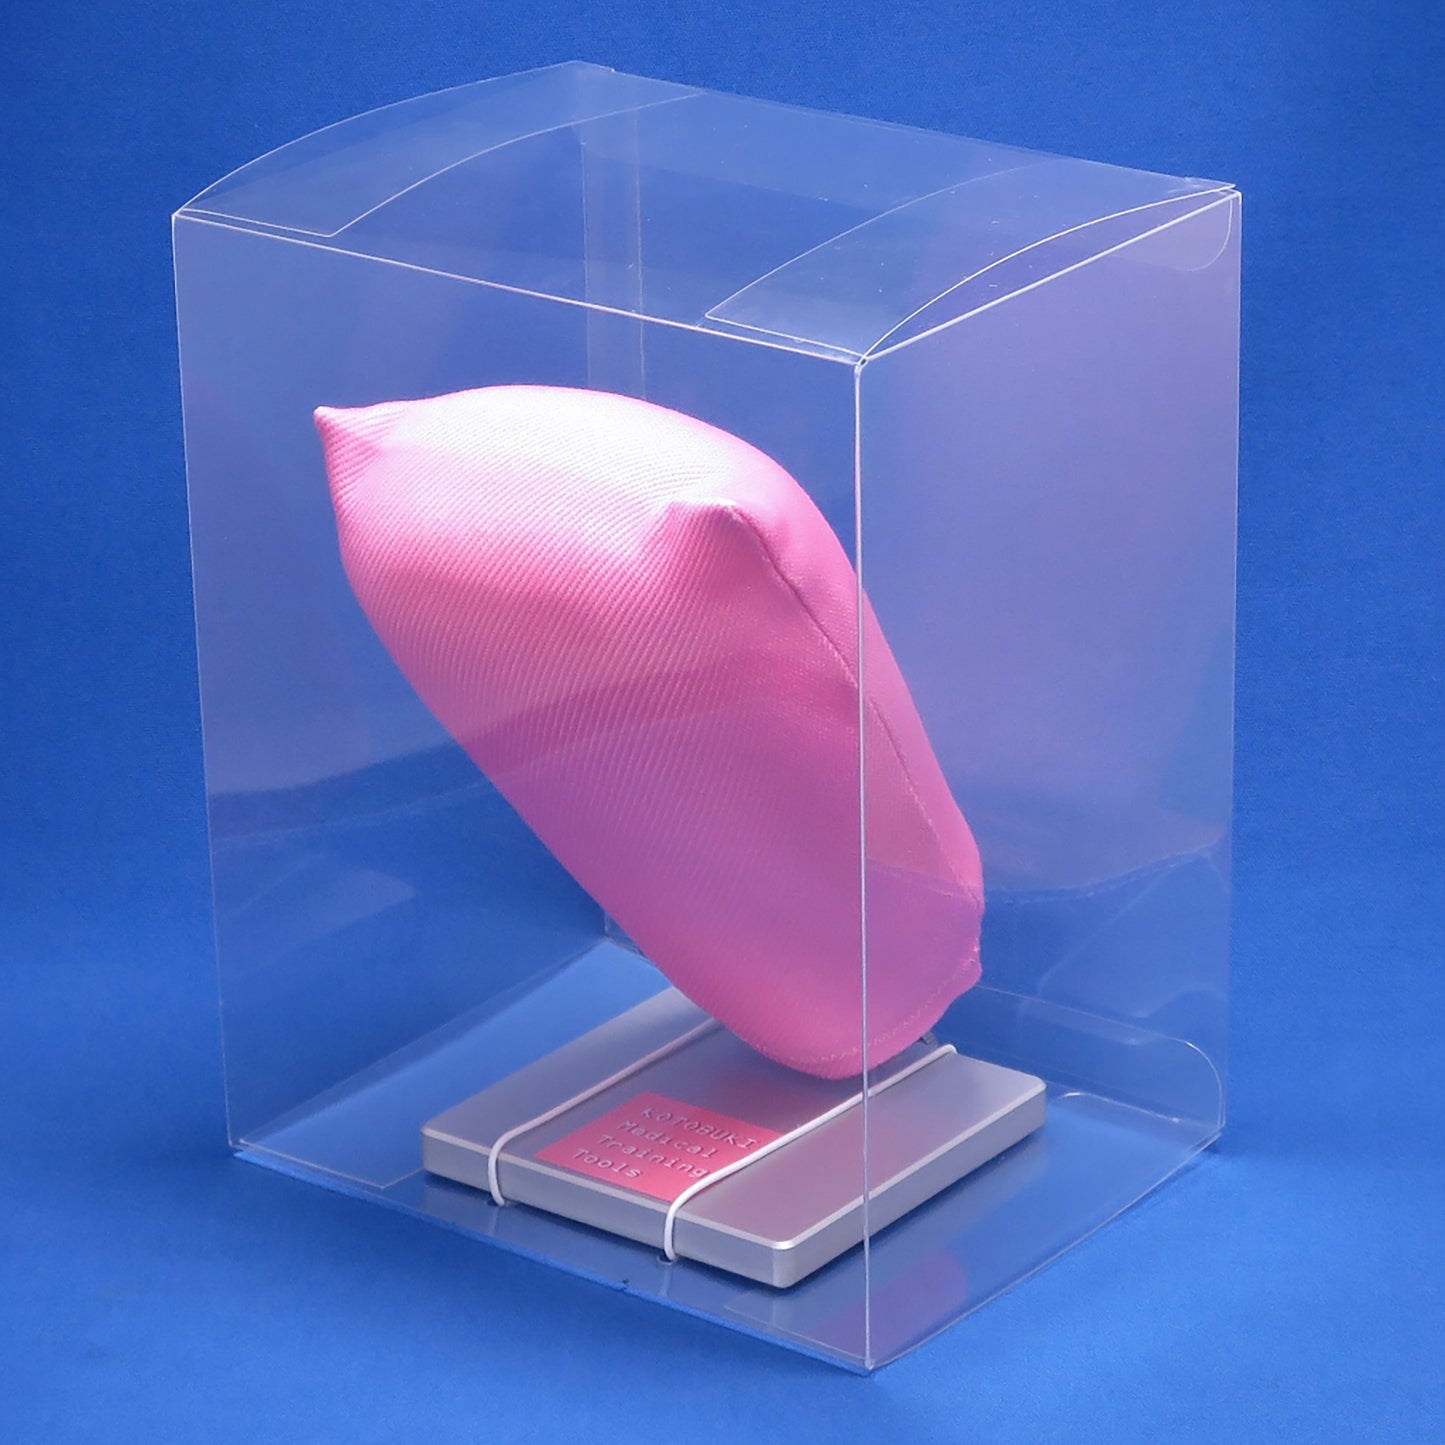 The Laparoscopic Myectomy Model in a clear, plastic box against a blue background. 